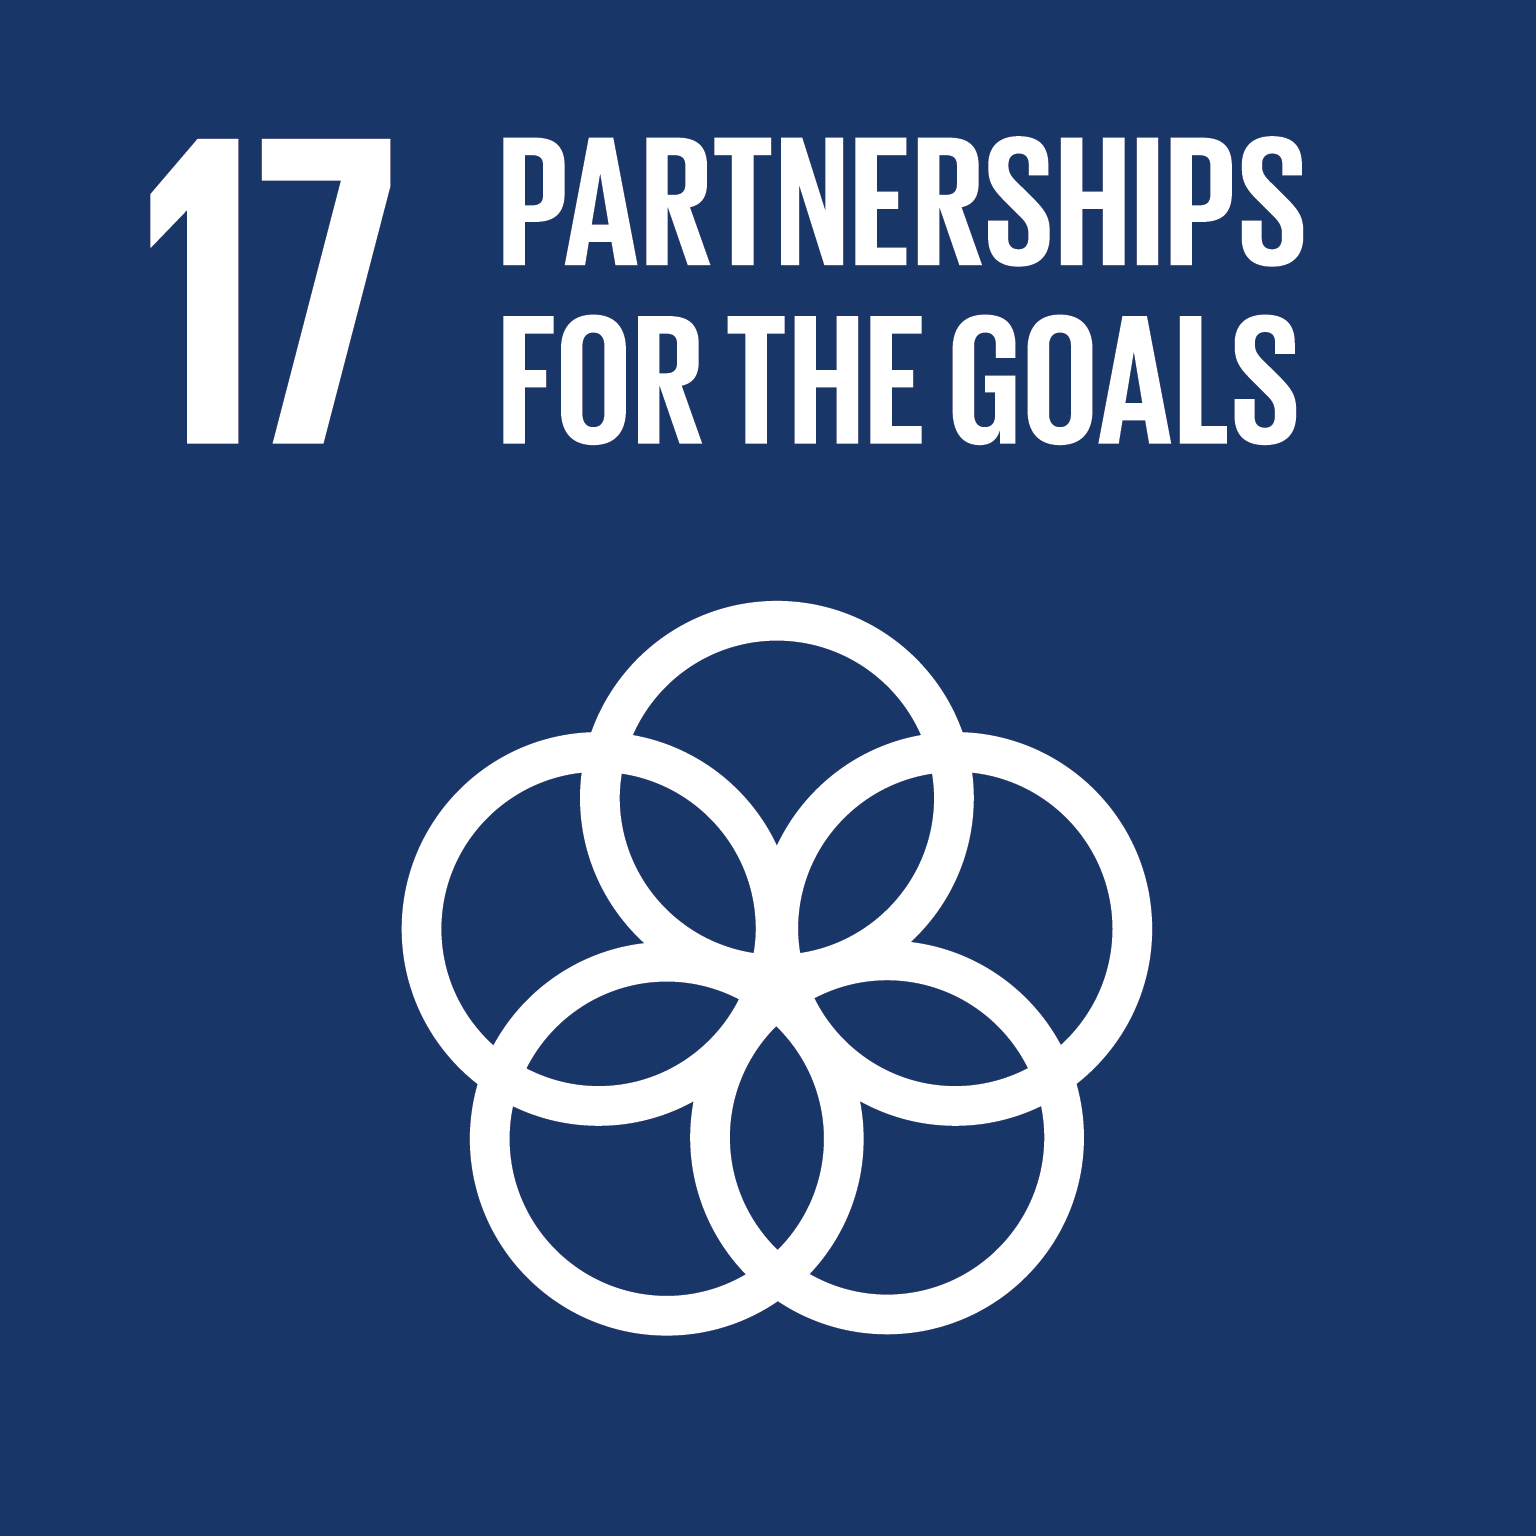 Goal 17 Partners for These Goals